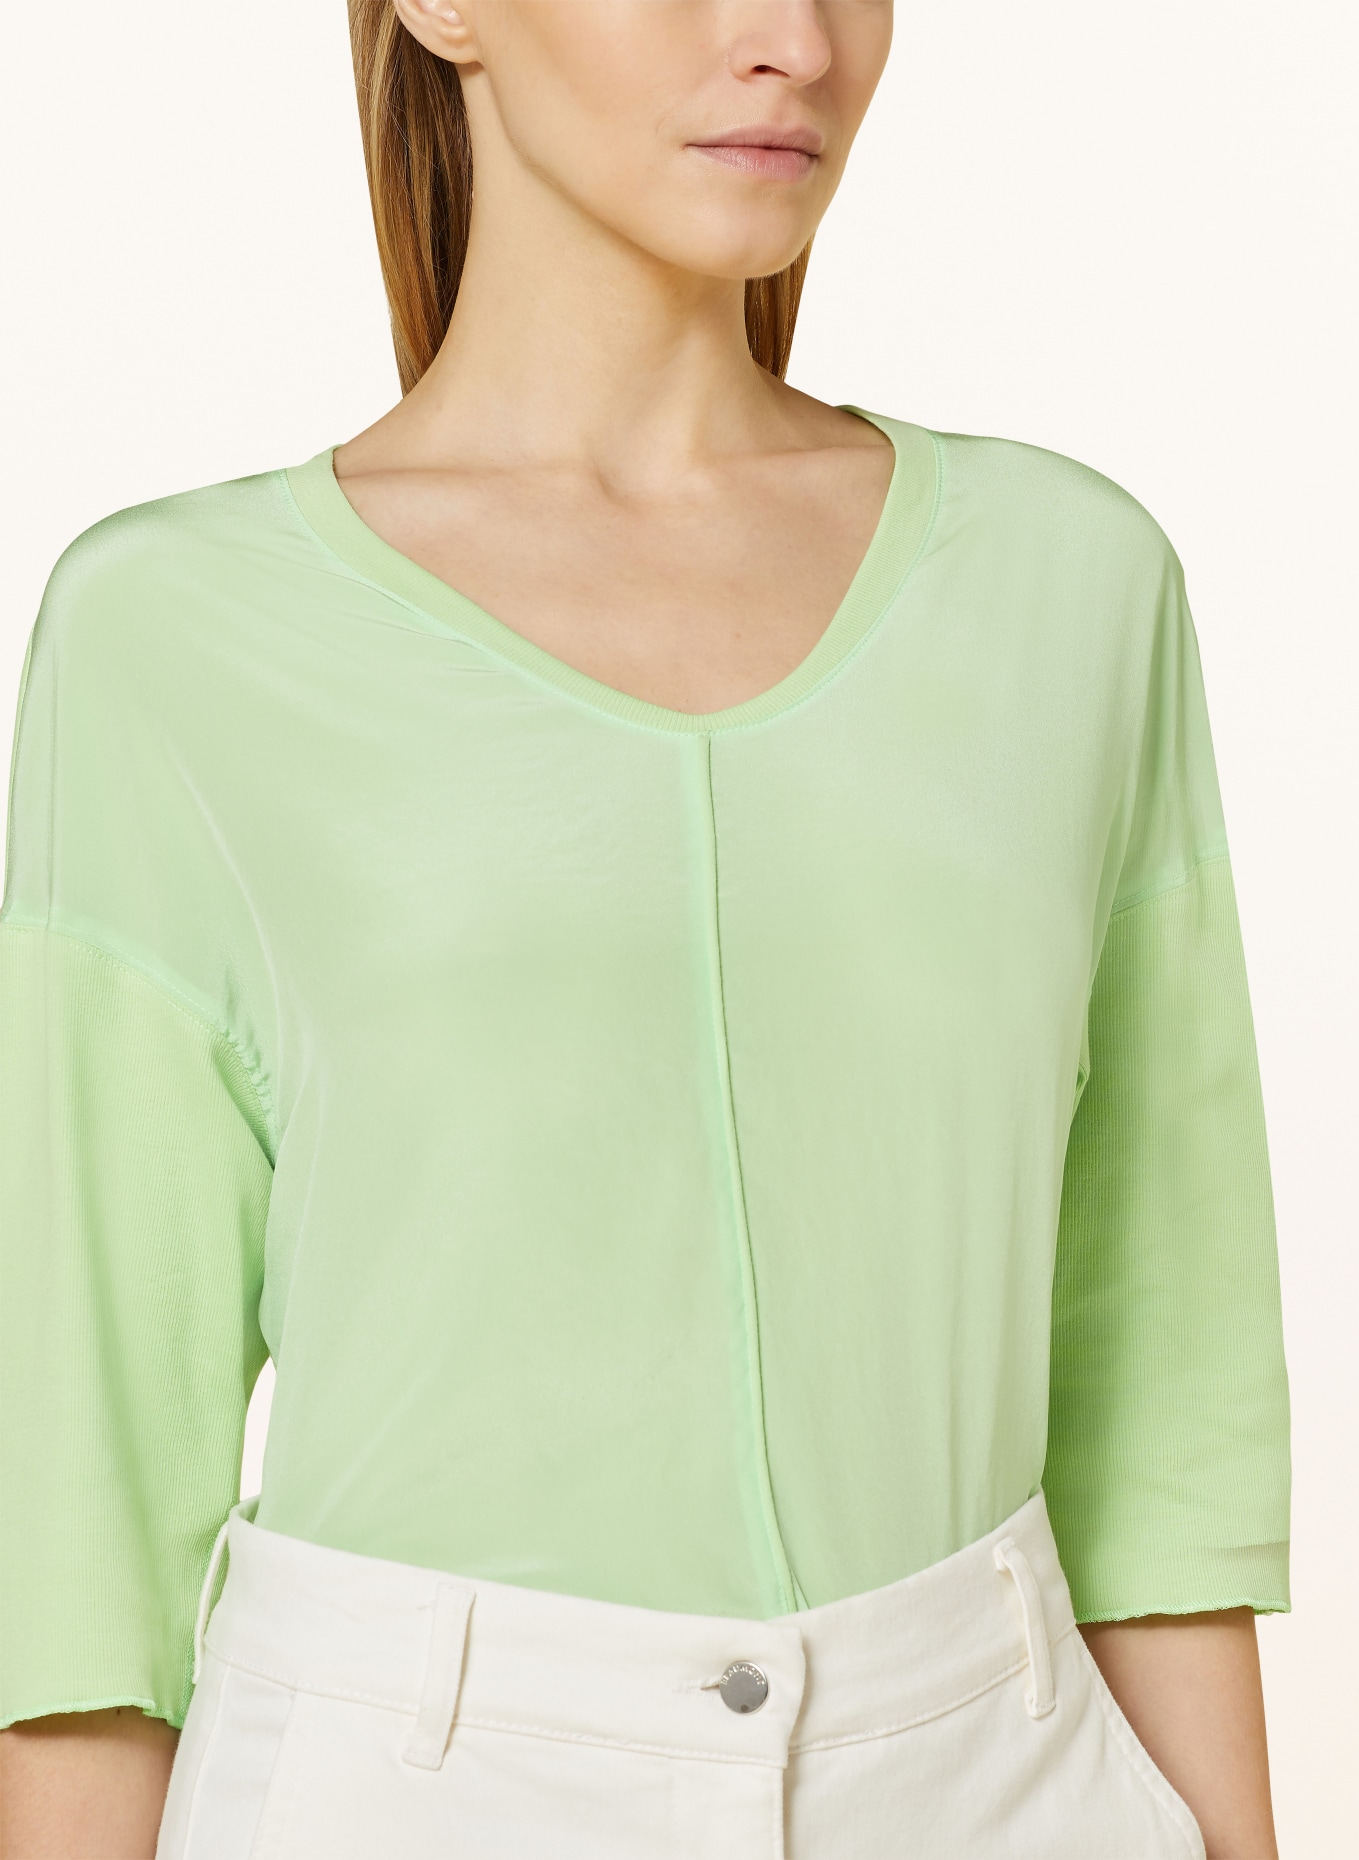 MARC CAIN Shirt blouse in mixed materials, Color: 531 light apple green (Image 4)